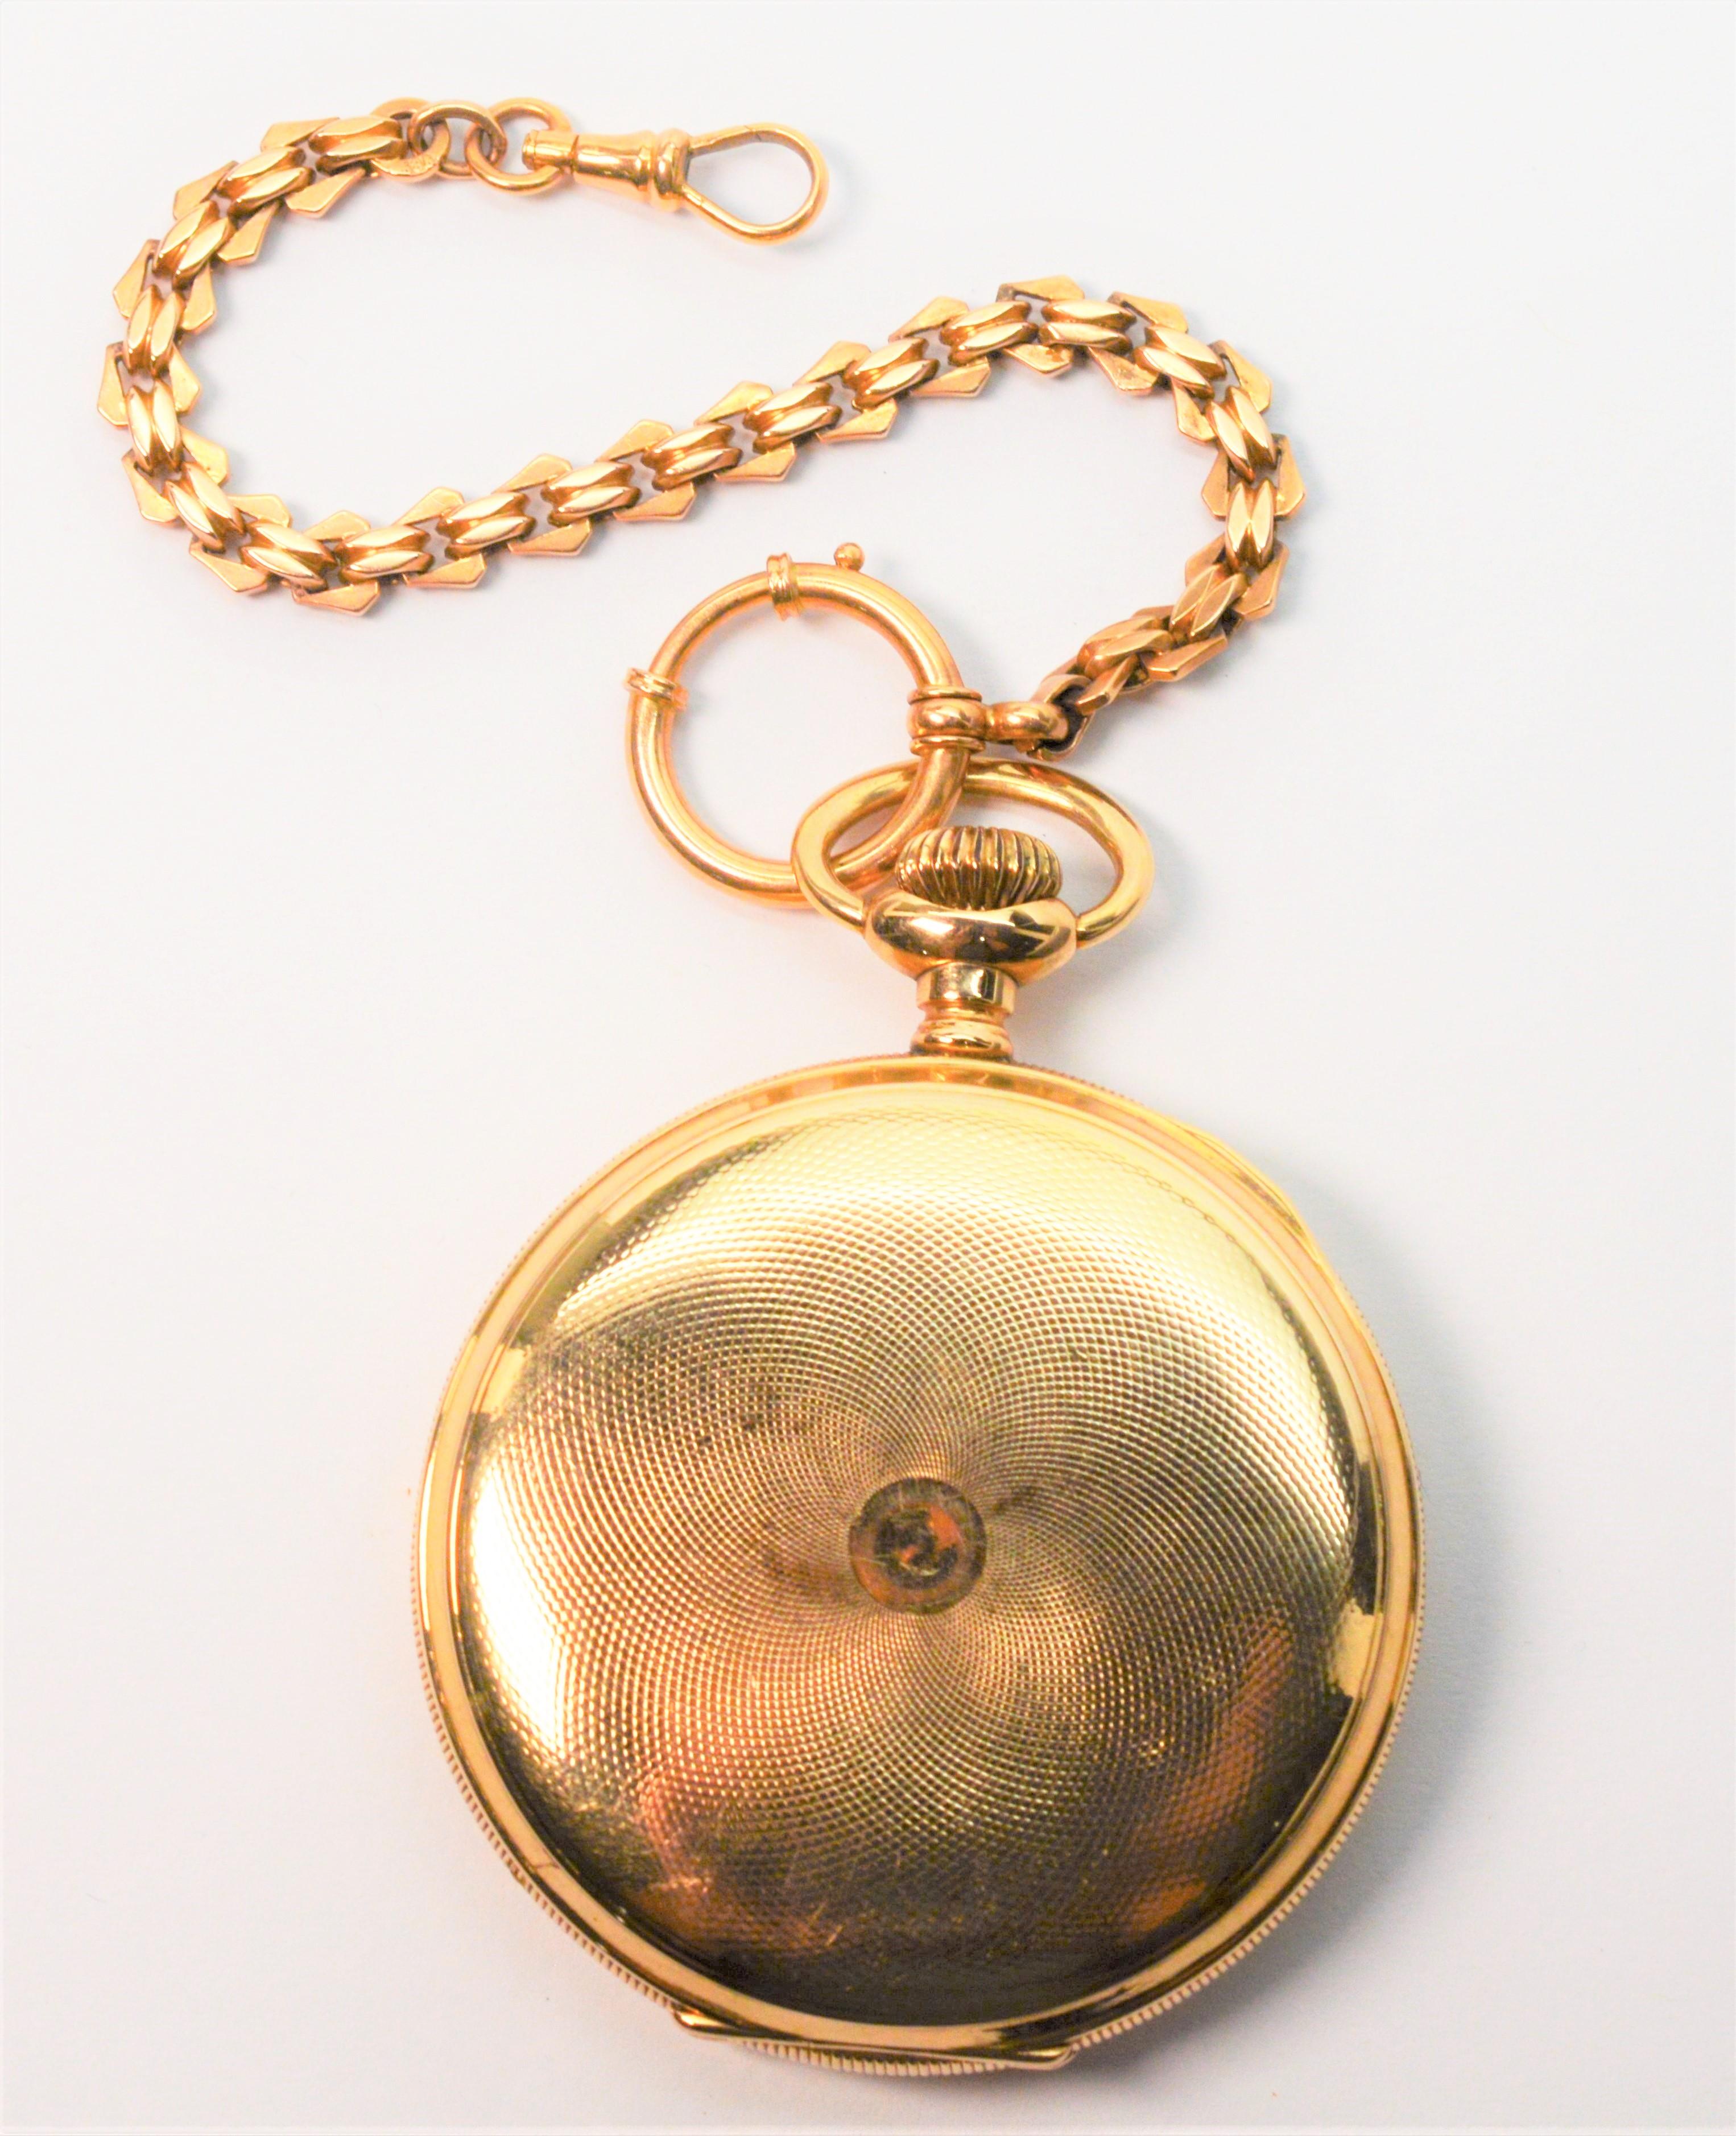 Antique Waltham American Watch Co. 14K Yellow Gold Pocket Watch with Gold Chain 1